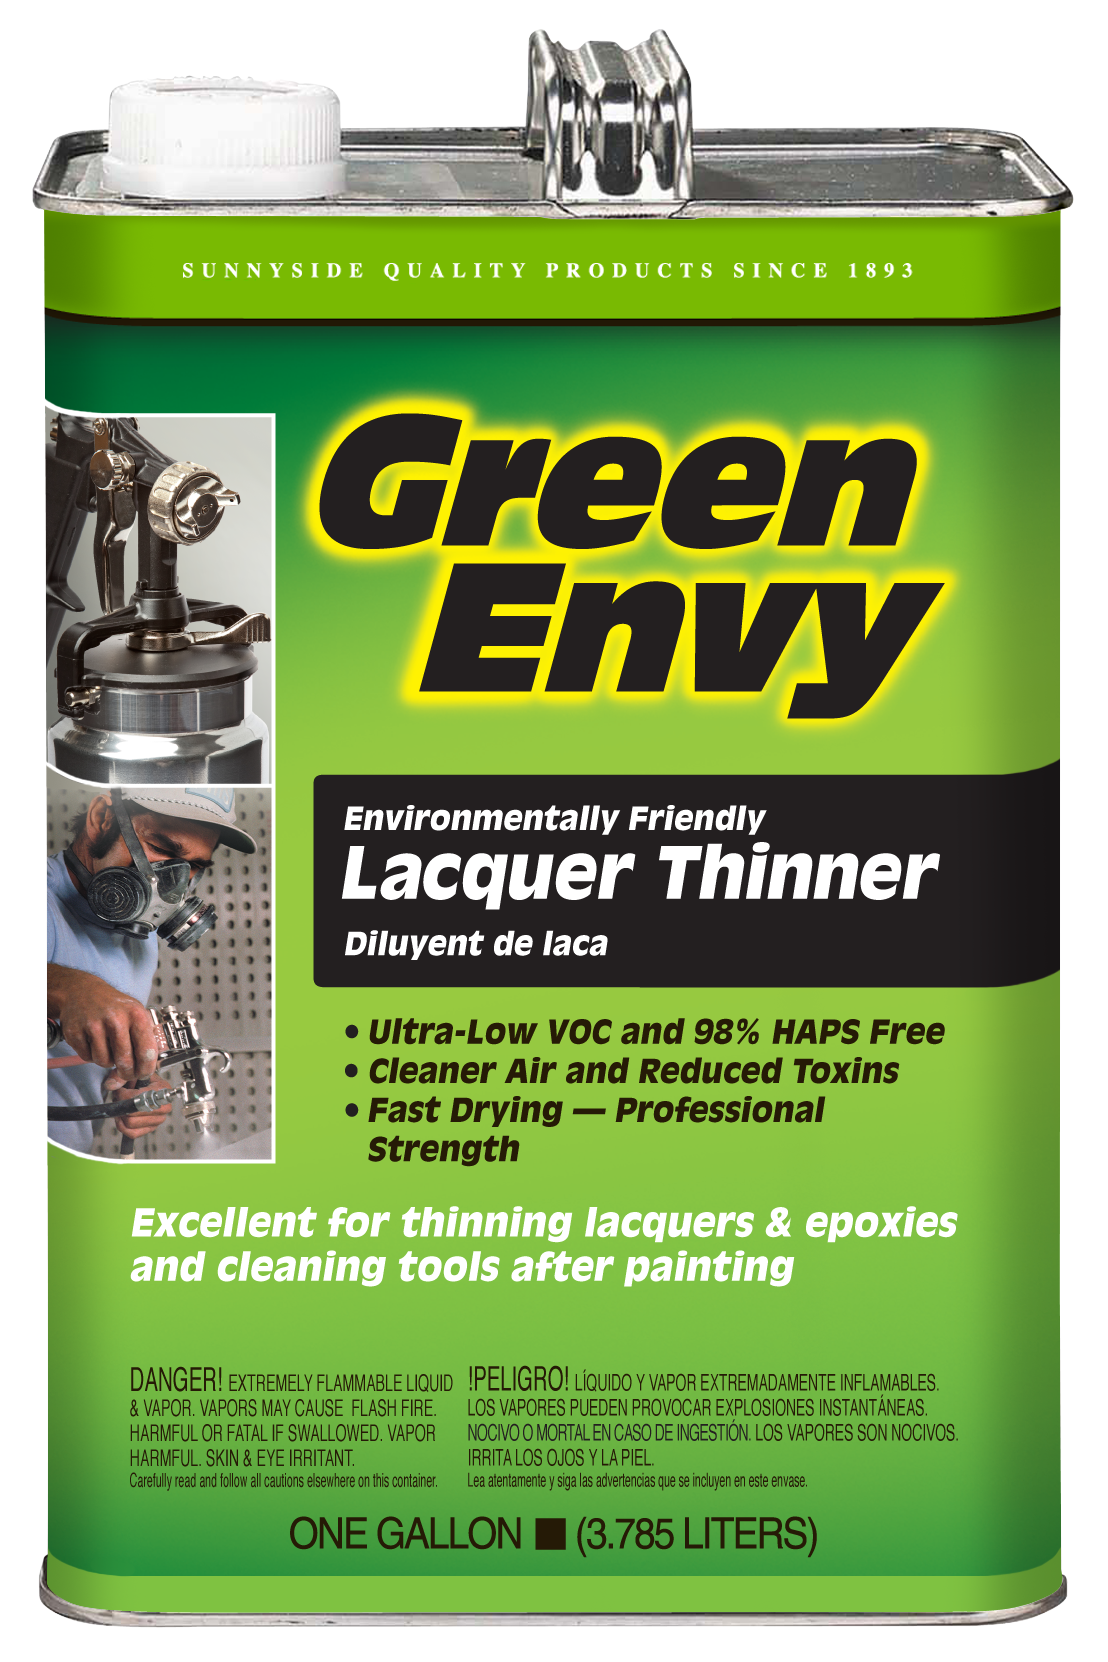 GREEN ENVY LACQUER THINNER Product Image